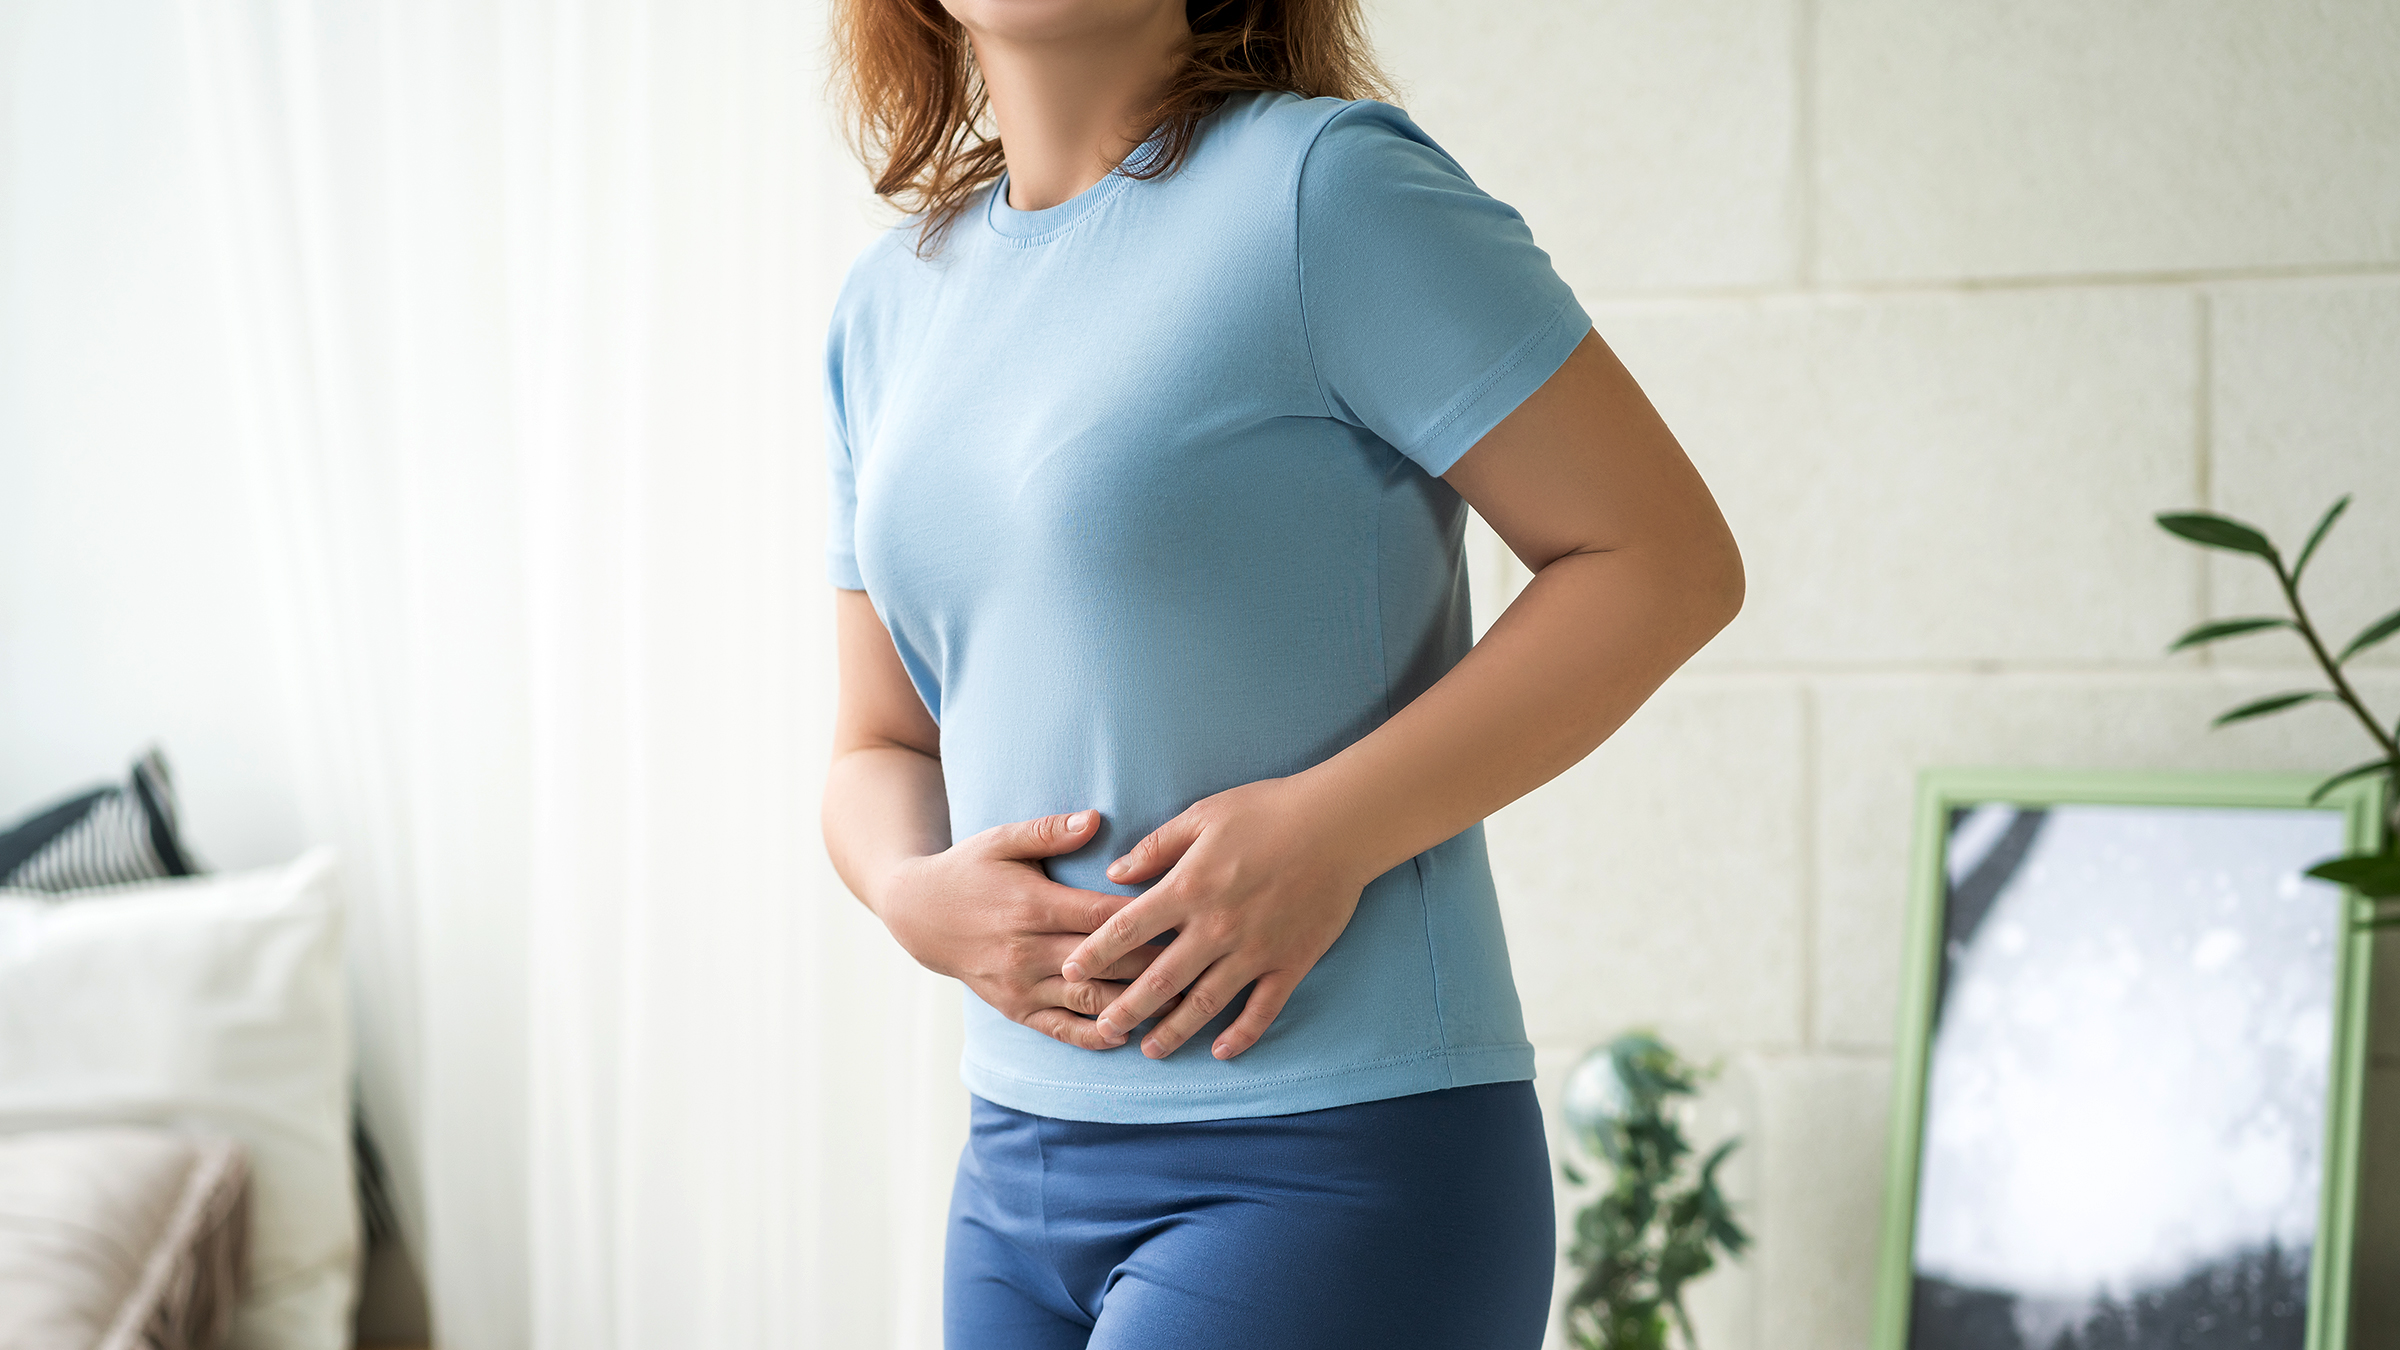 Free Vectors  Pregnant women with frequent urinary tract